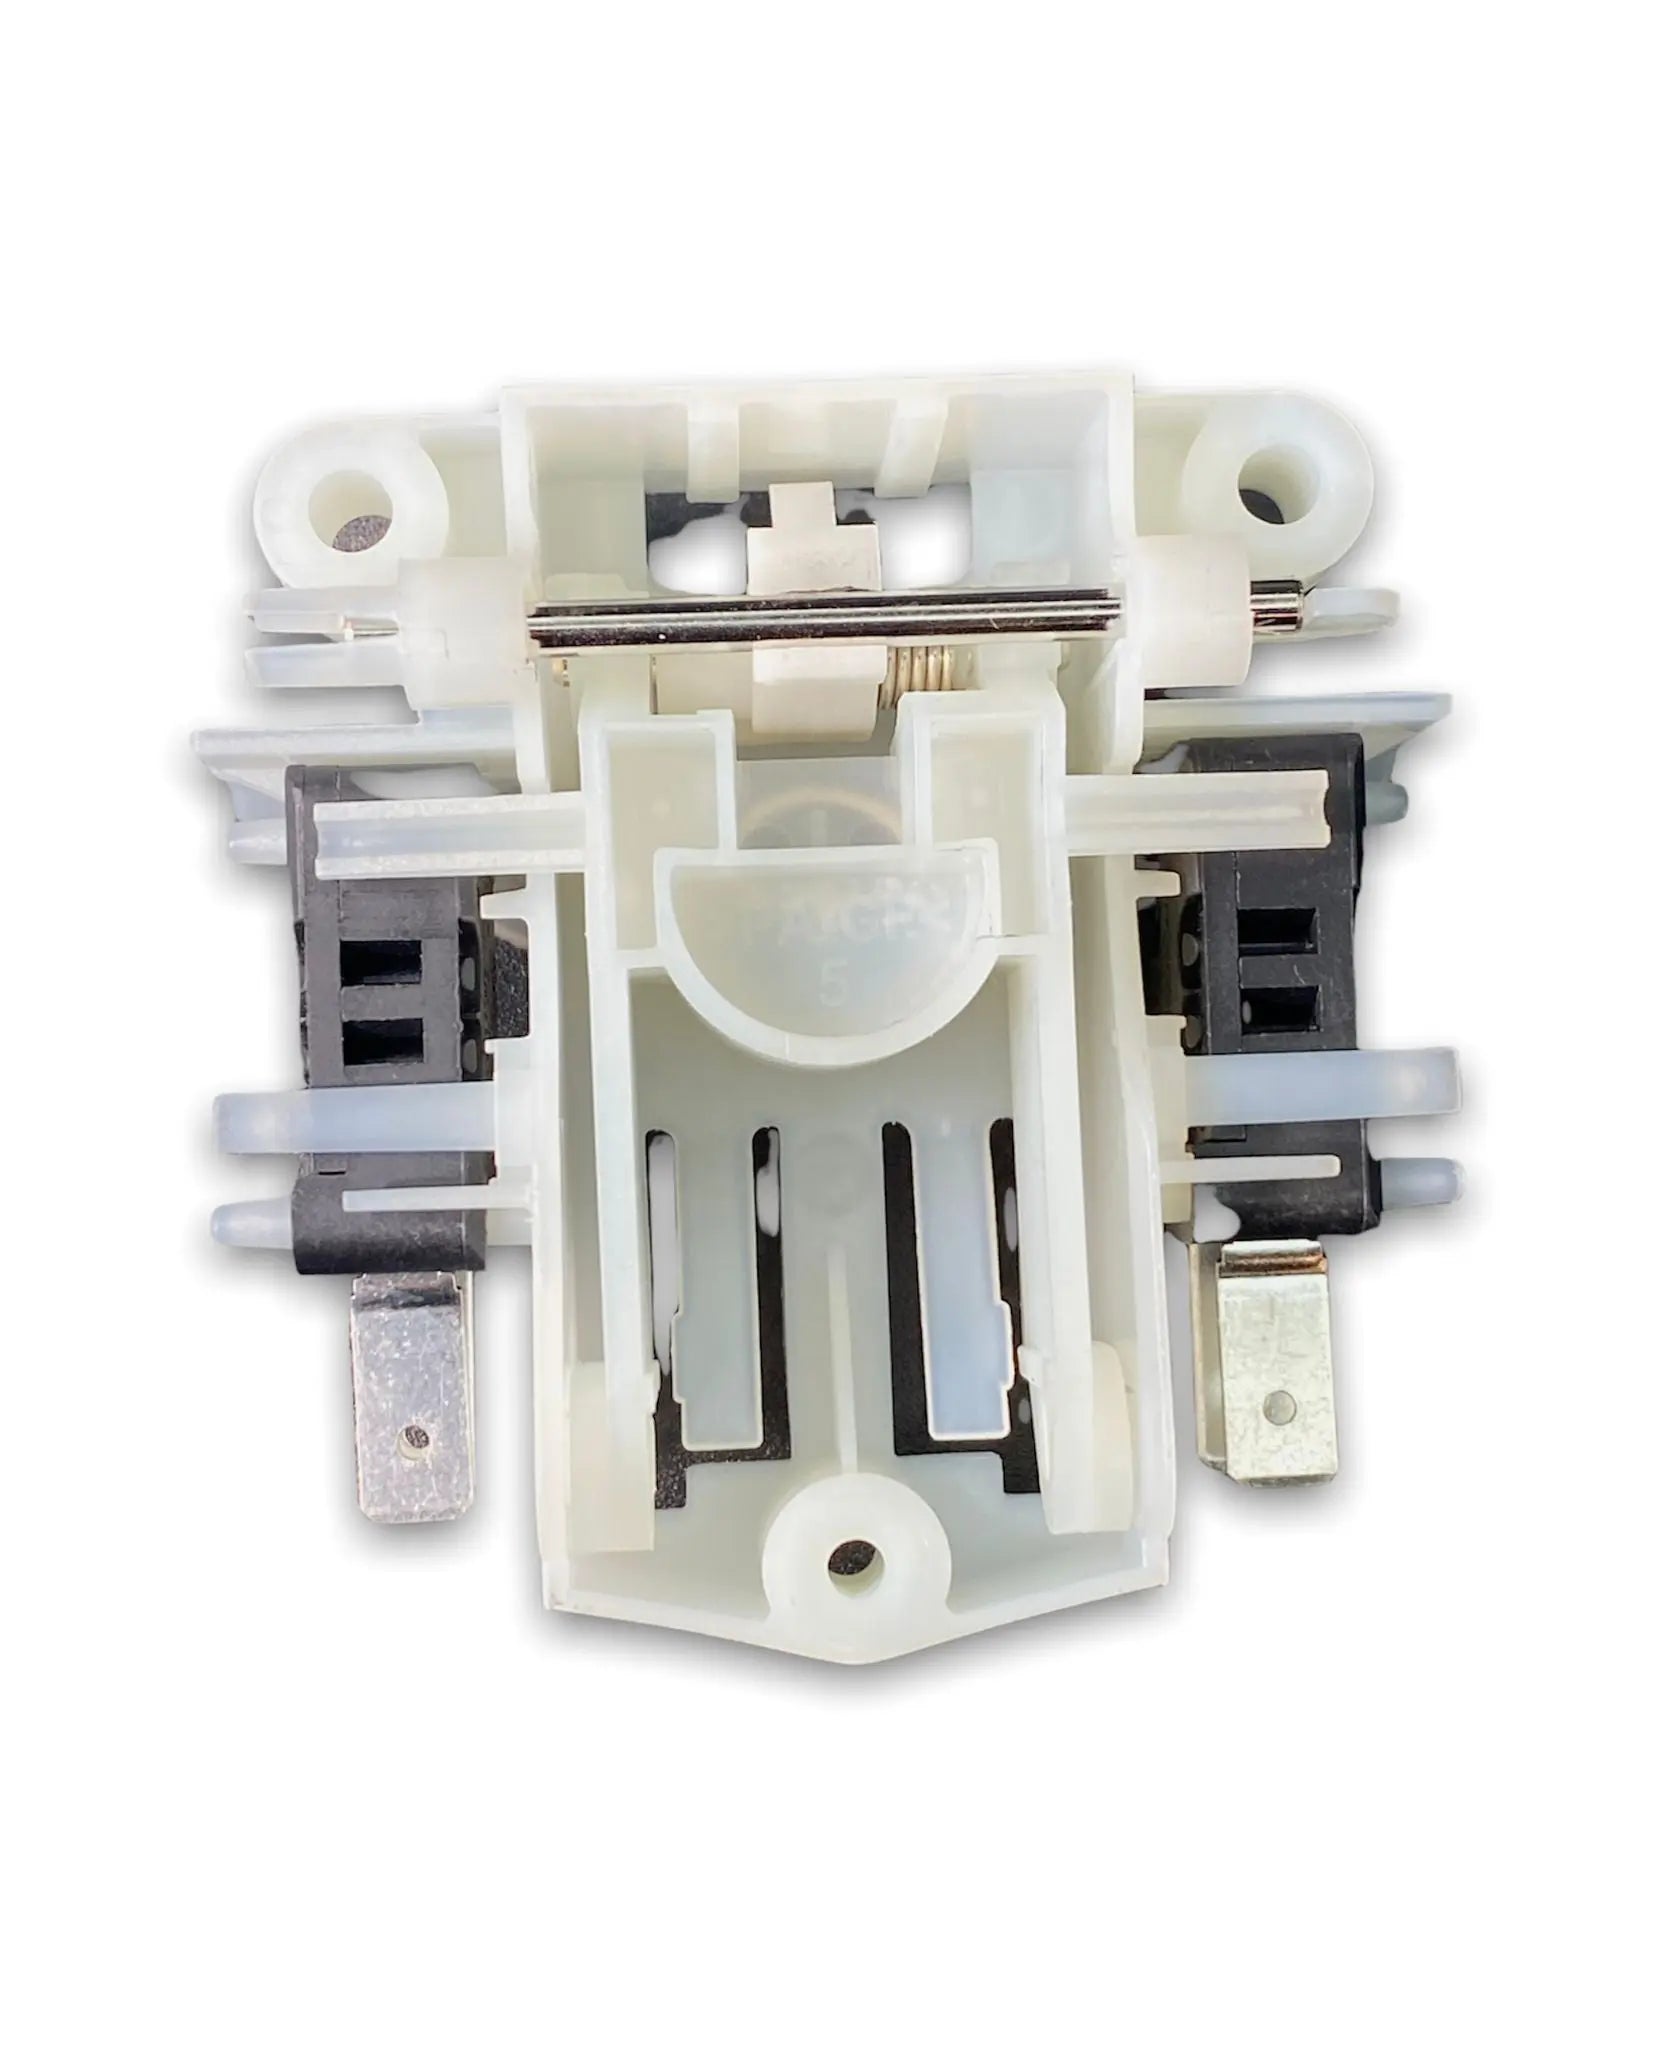 Samsung Dishwasher Door Latch /Switch - DD34-00002B ,  REPLACES: 1603323 AP4342486 PS4222318 EAP4222318 PD00002157 INVERTEC